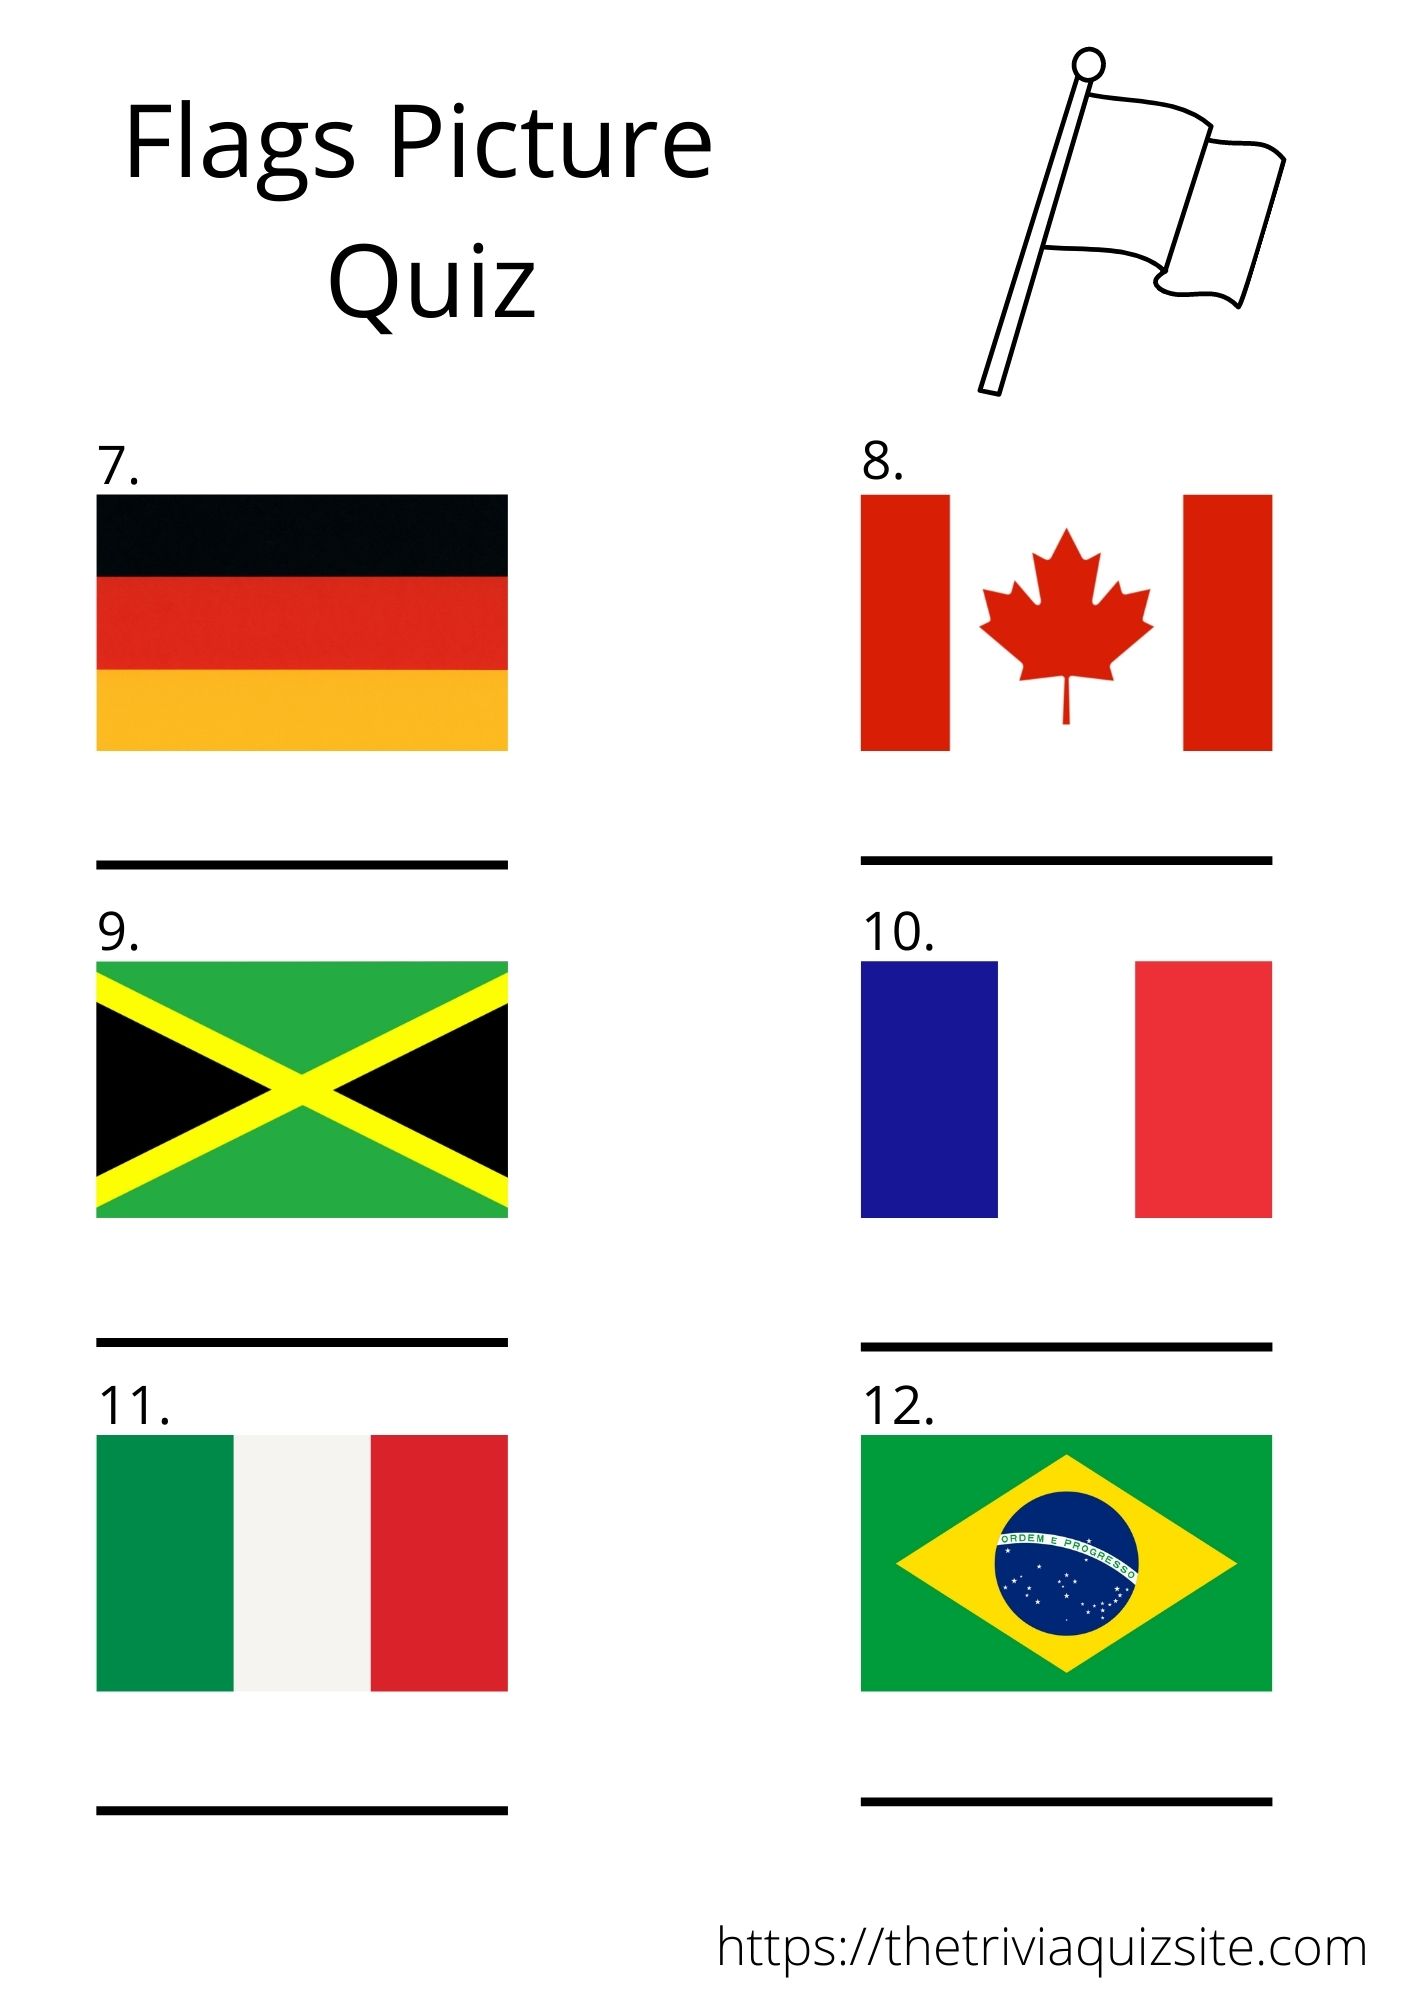 flags-of-the-world-picture-quiz-free-printable-the-trivia-quiz-site